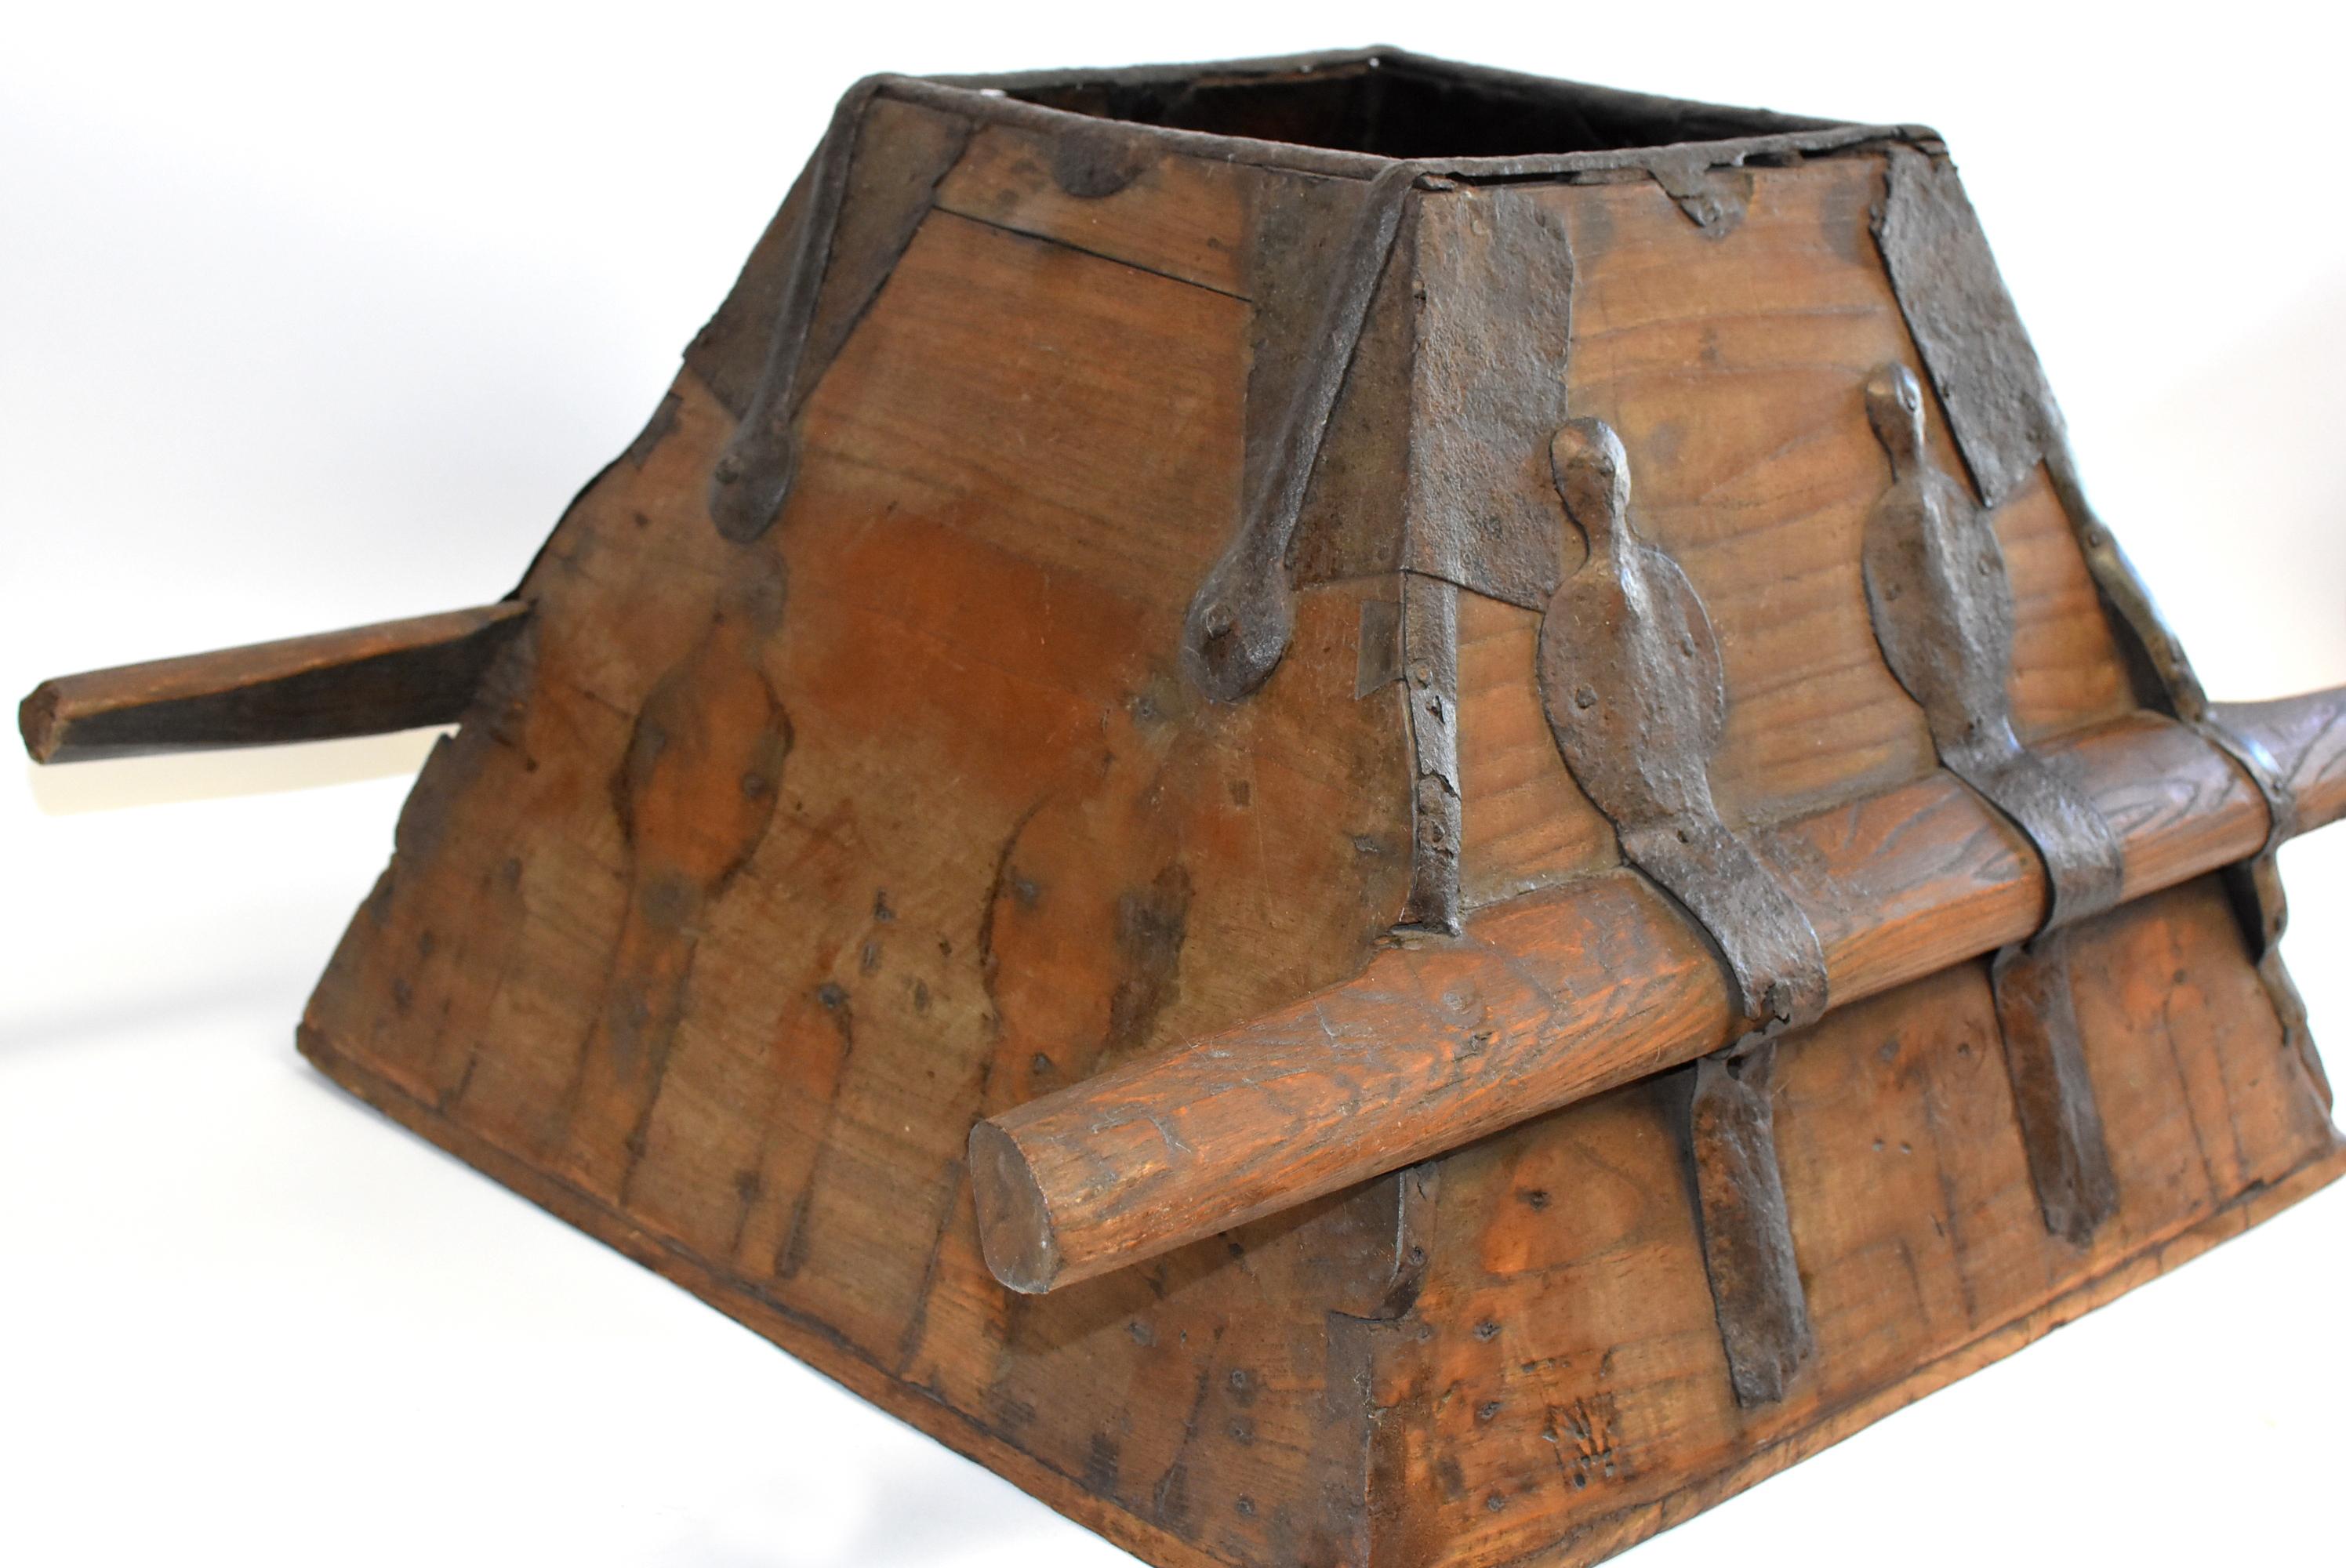 A solid wood trapezoid shaped bucket from northern China, province of Shann XI. The solid construction is reinforced by bands of hand-forged iron strips. Two solid handle bars are held securely by the same iron braces that also protect all corners.